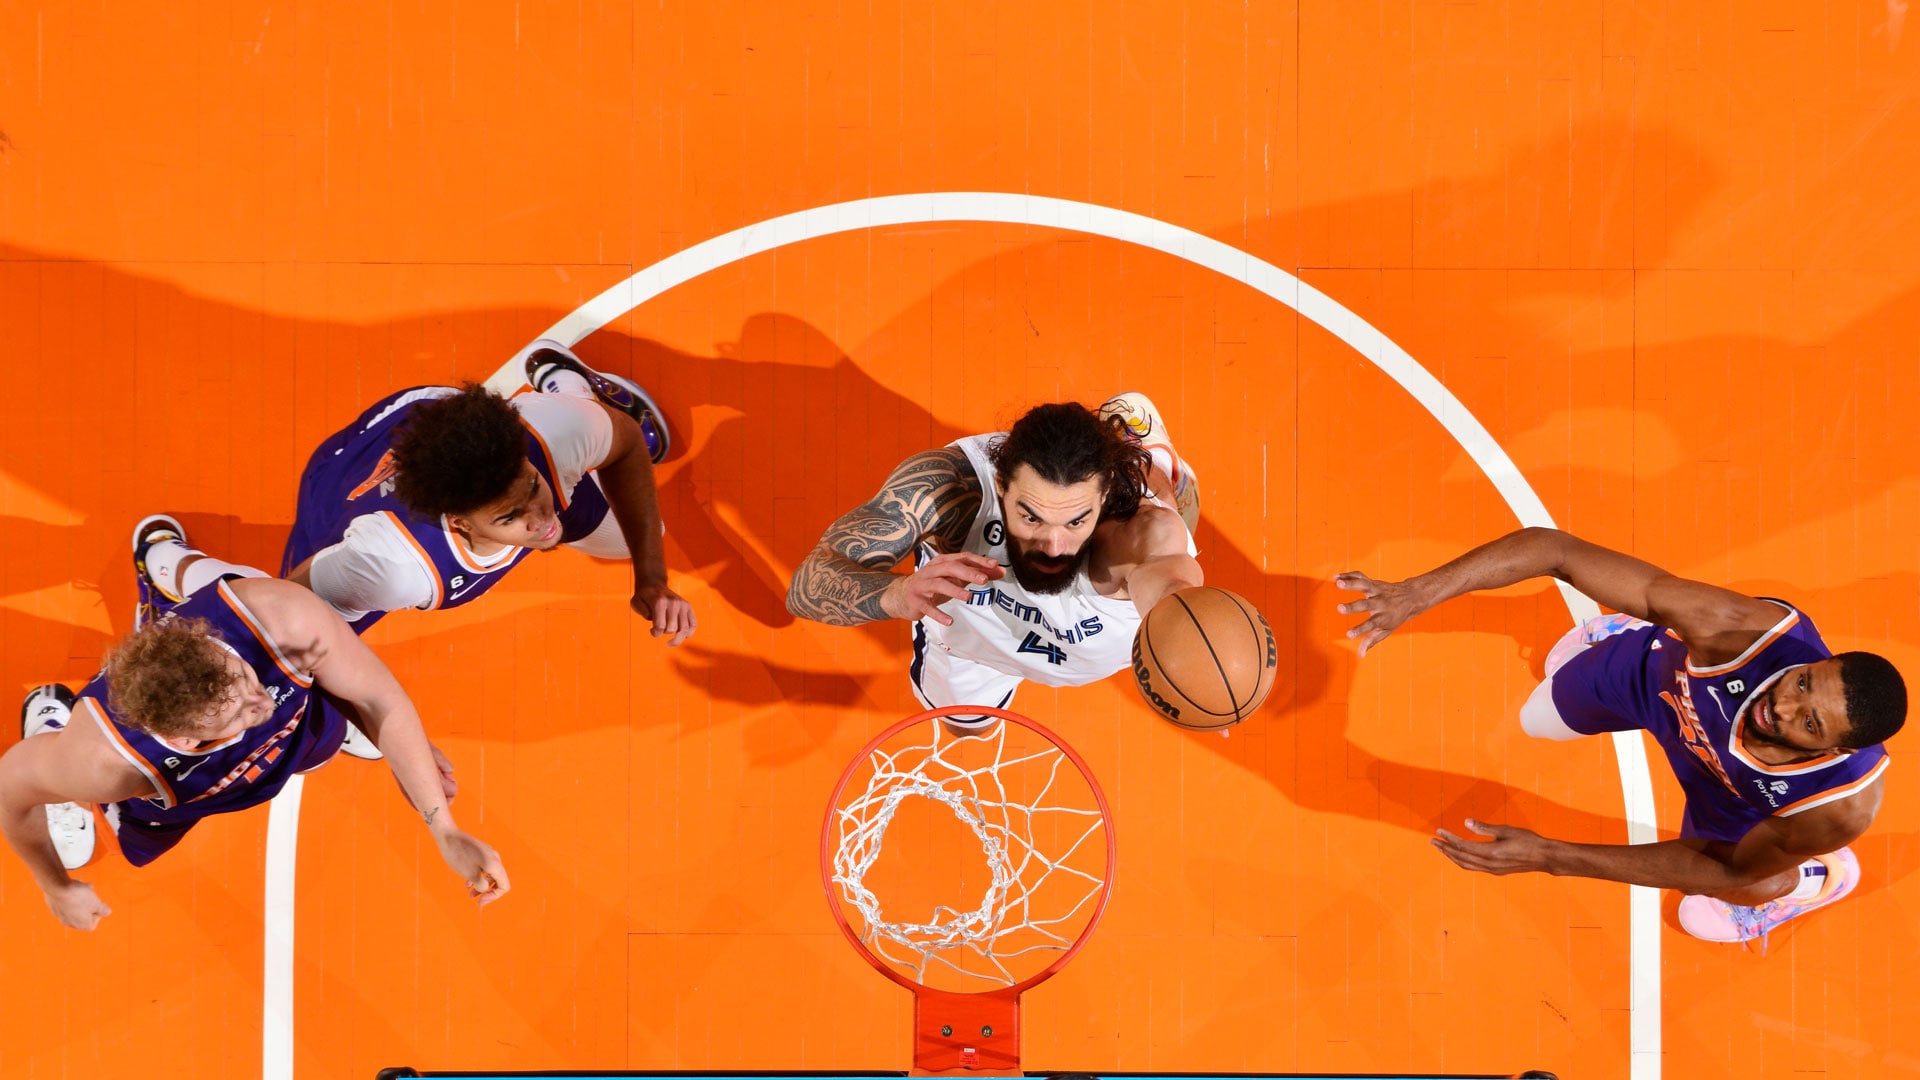 PHOENIX, AZ - JANUARY 22: Steven Adams #4 of the Memphis Grizzlies drives to the basket during the game against the Phoenix Suns on January 22, 2023 at Footprint Center in Phoenix, Arizona.